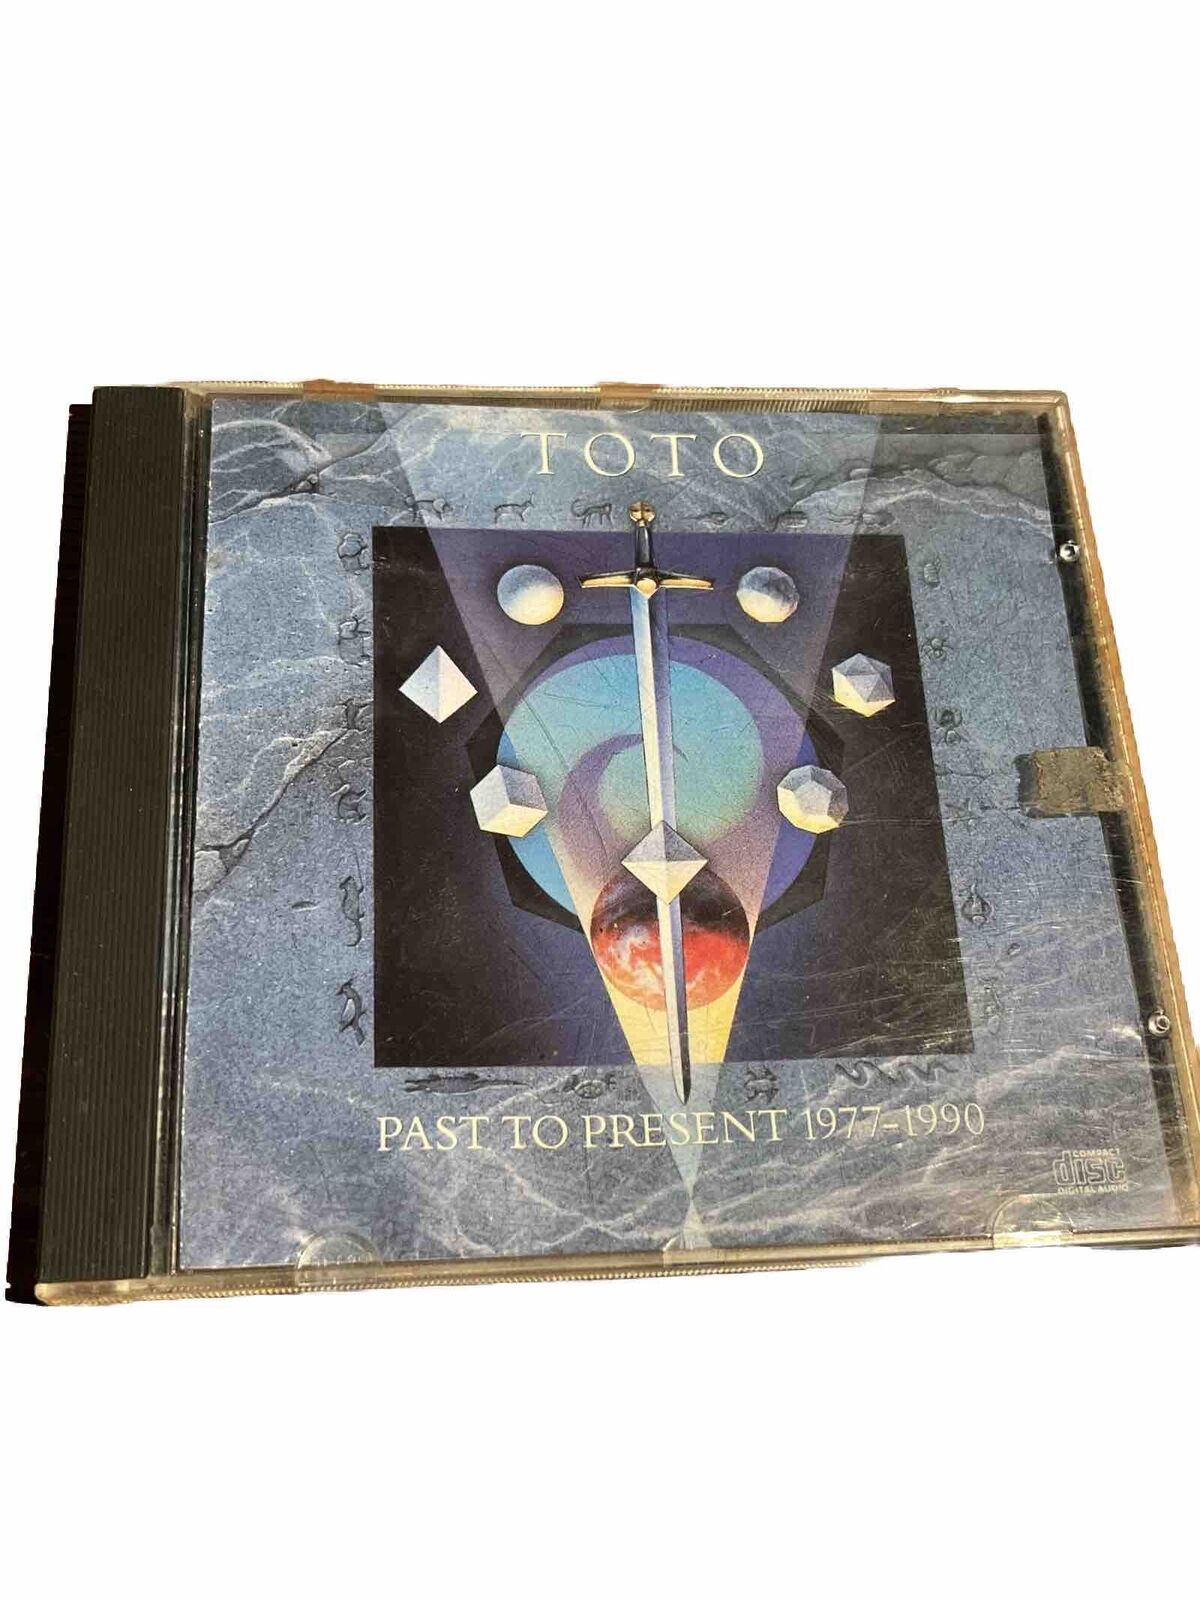 Toto, Past To Present 1977-1990, CD, 1990